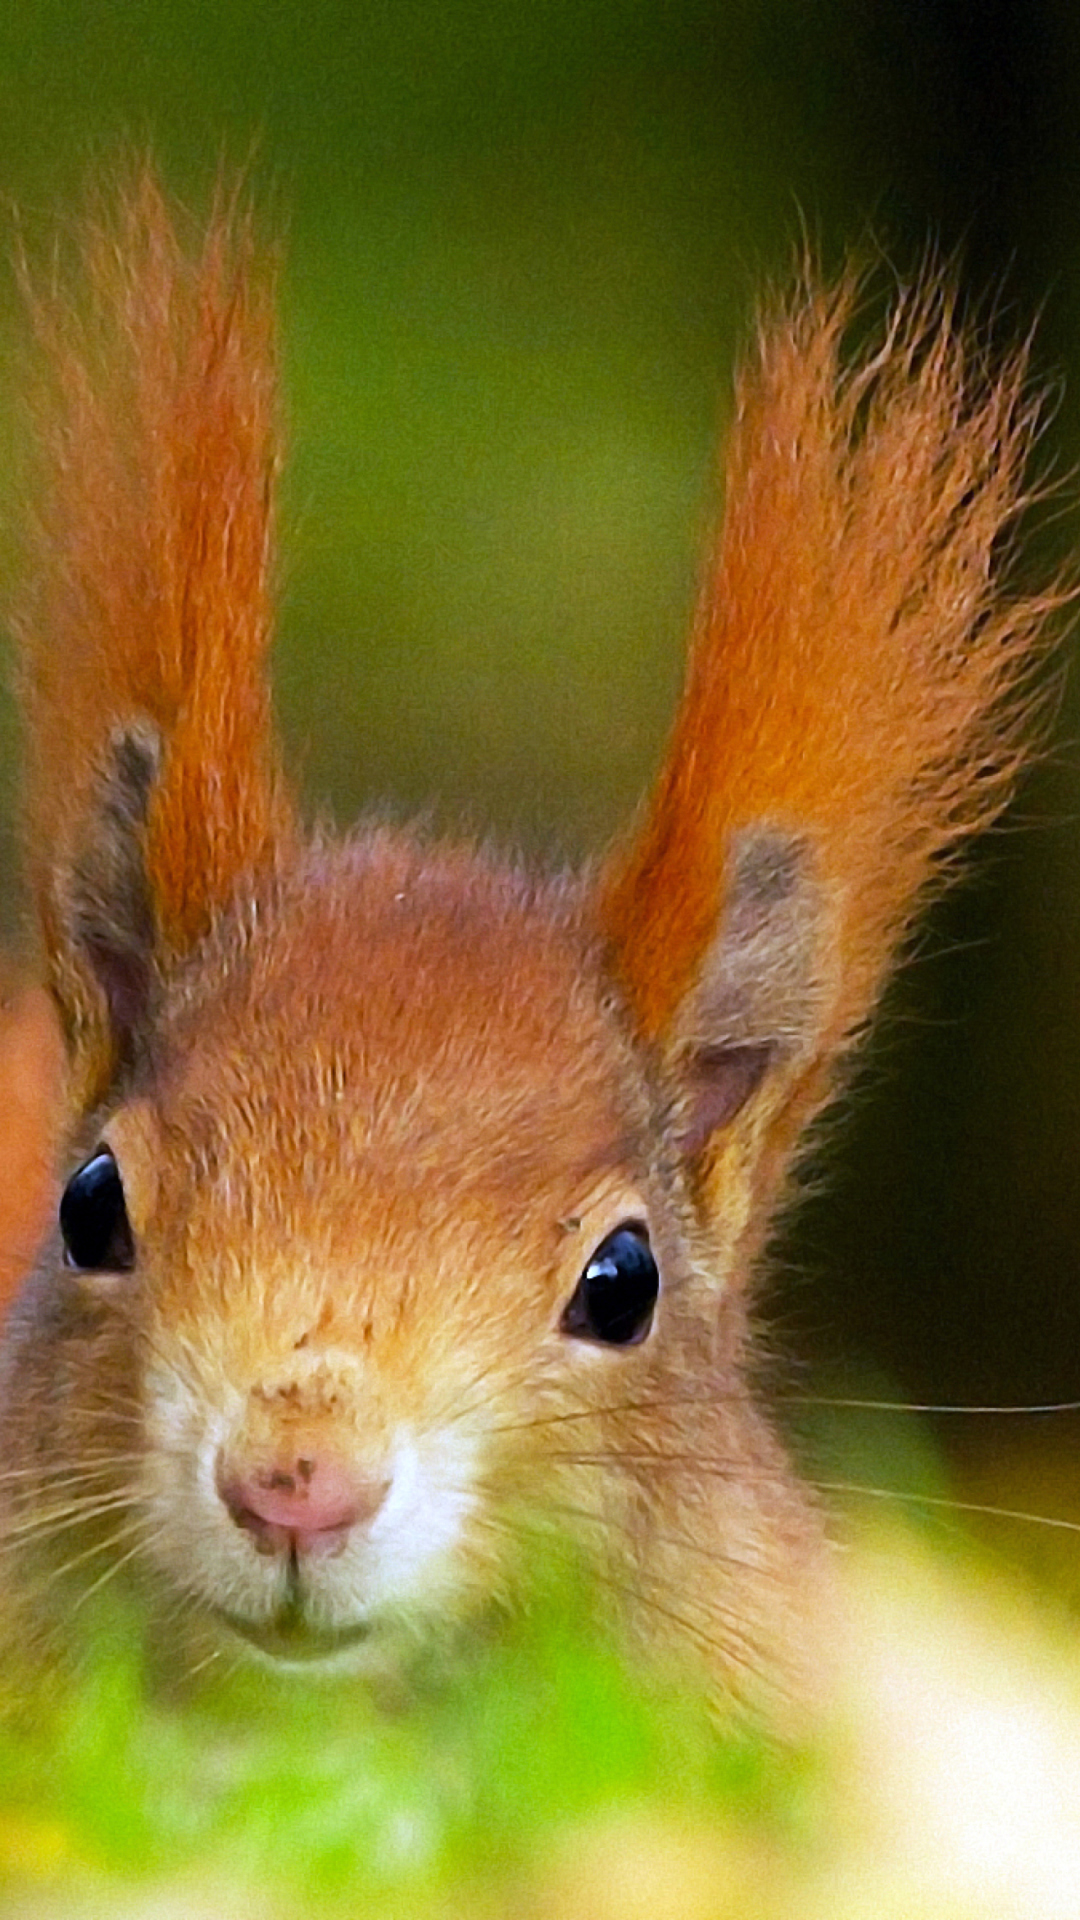 Funny Little Squirrel wallpaper 1080x1920